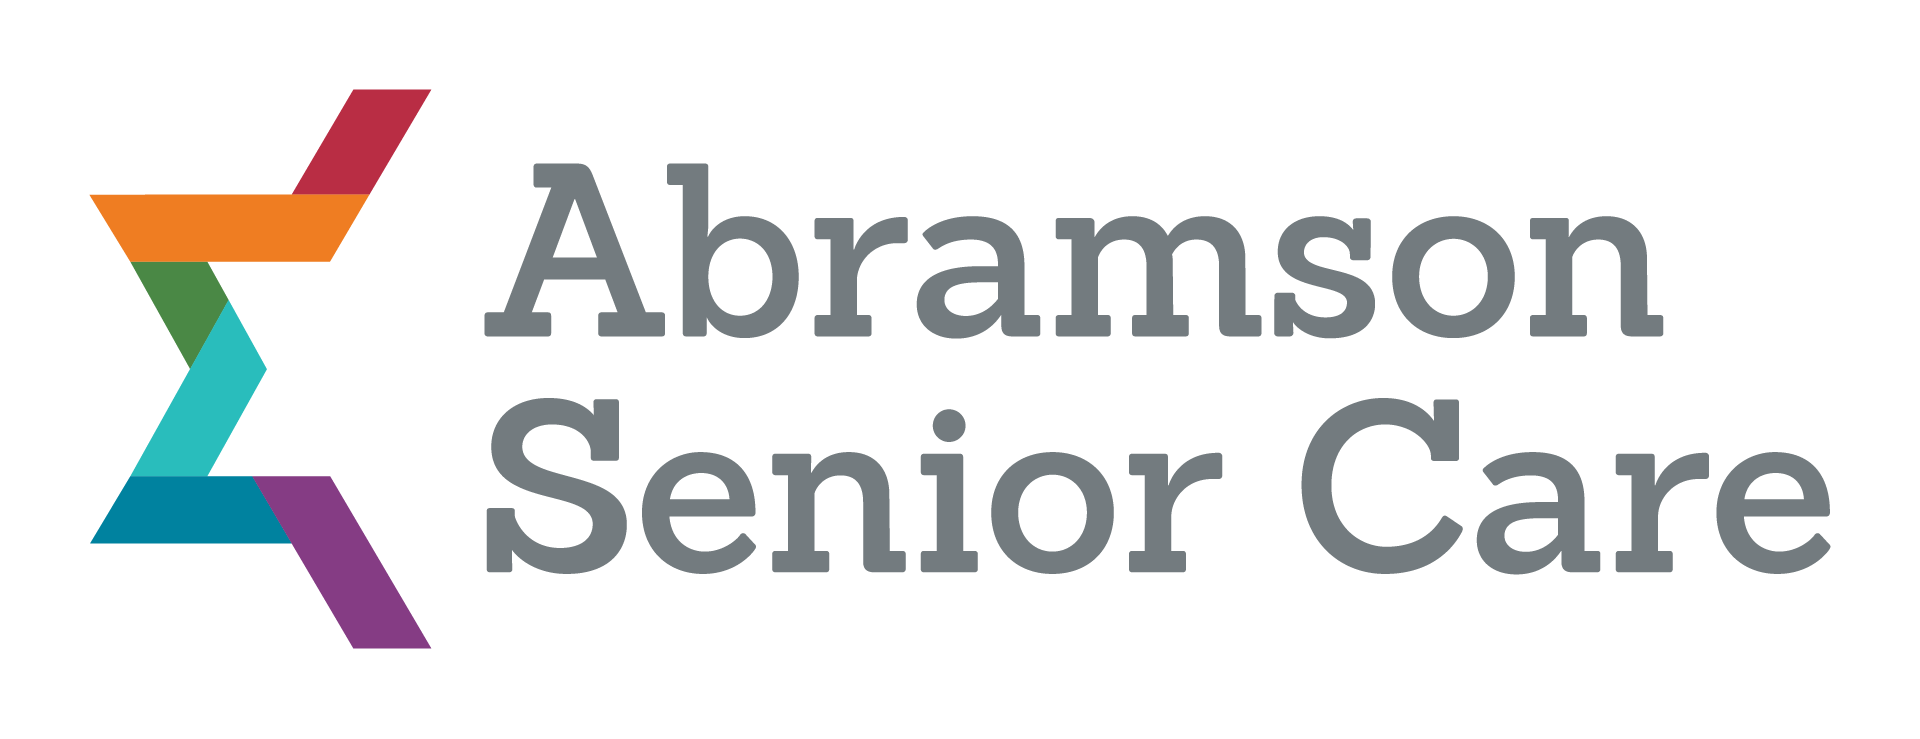 Abramson Senior Care receives grant from Jewish Federation of Greater Philadelphia’s Maimonides Fund for Health and Human Service Relief